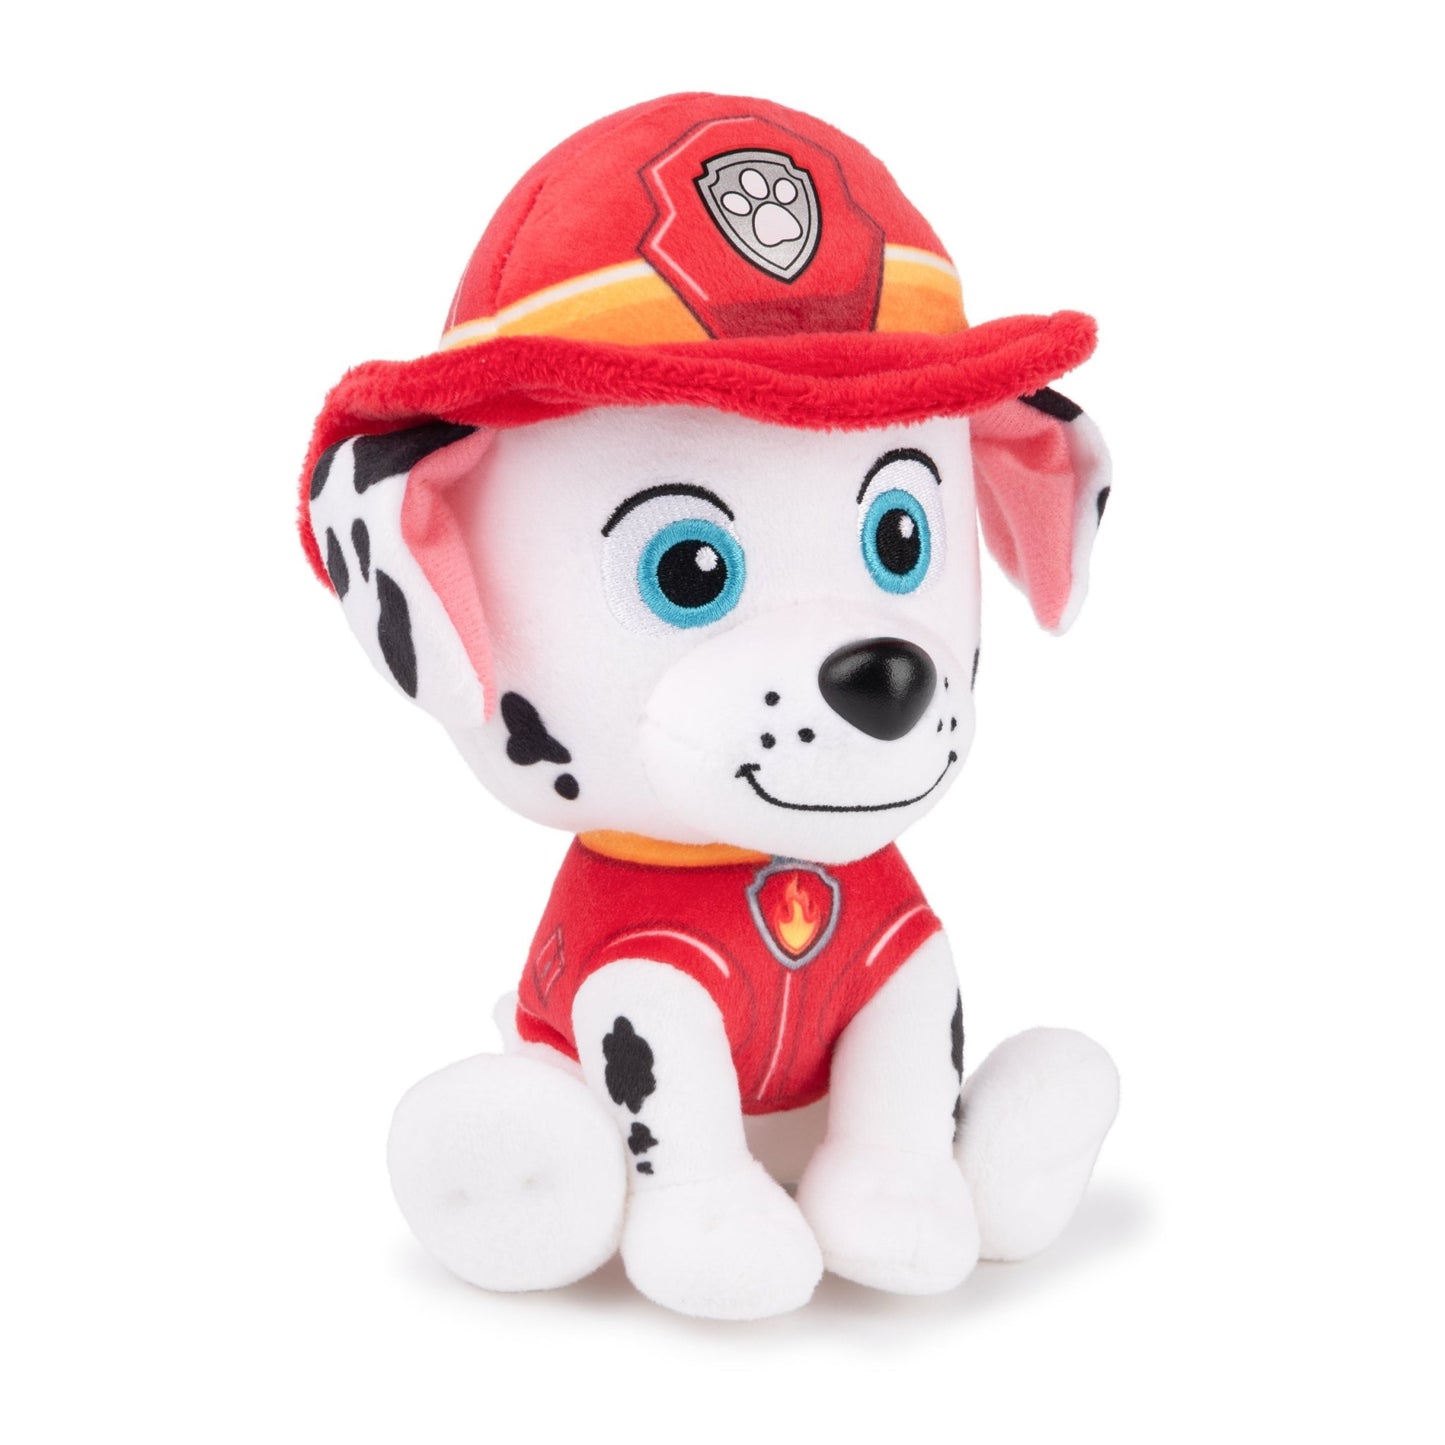 GUND Official PAW Patrol Marshall in Signature Firefighter Uniform Plush Toy, Stuffed Animal for Ages 1 and Up, 6" - Paramount Shop